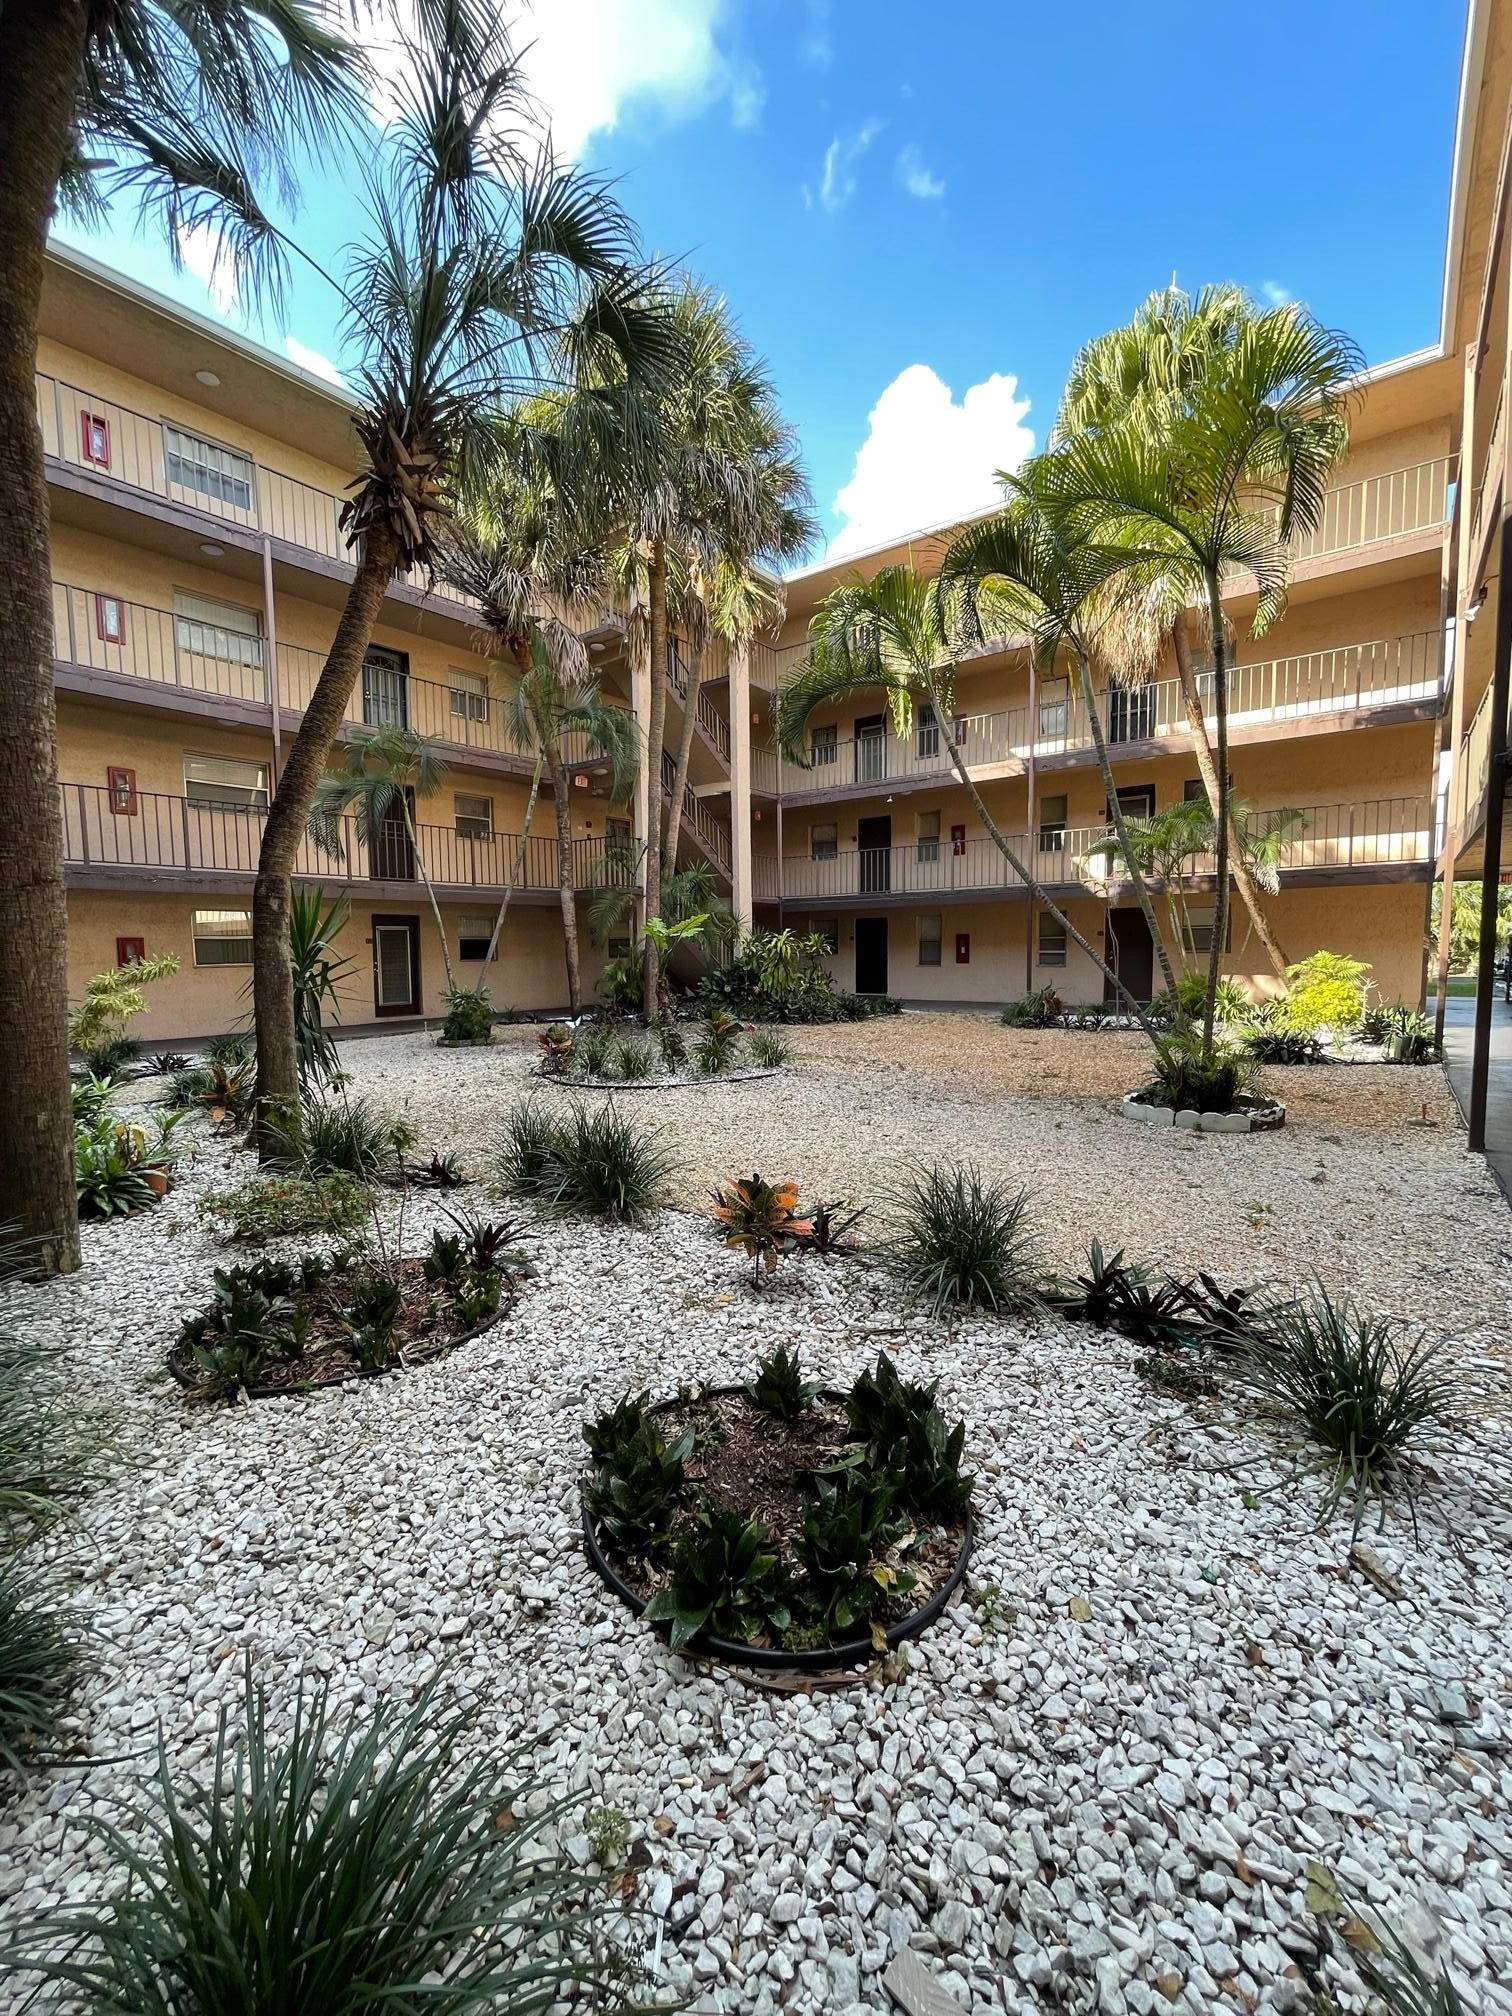 GREAT FIRST FLOOR UNIT CONDO, 2 BEDROOMS 2 BATHS IN BEAUTIFUL SOMERSET COMPLEX, 10 MINUTES FROM FORT LAUDERDALE BEACH AIRPORT, NEEDS SOME TLC.